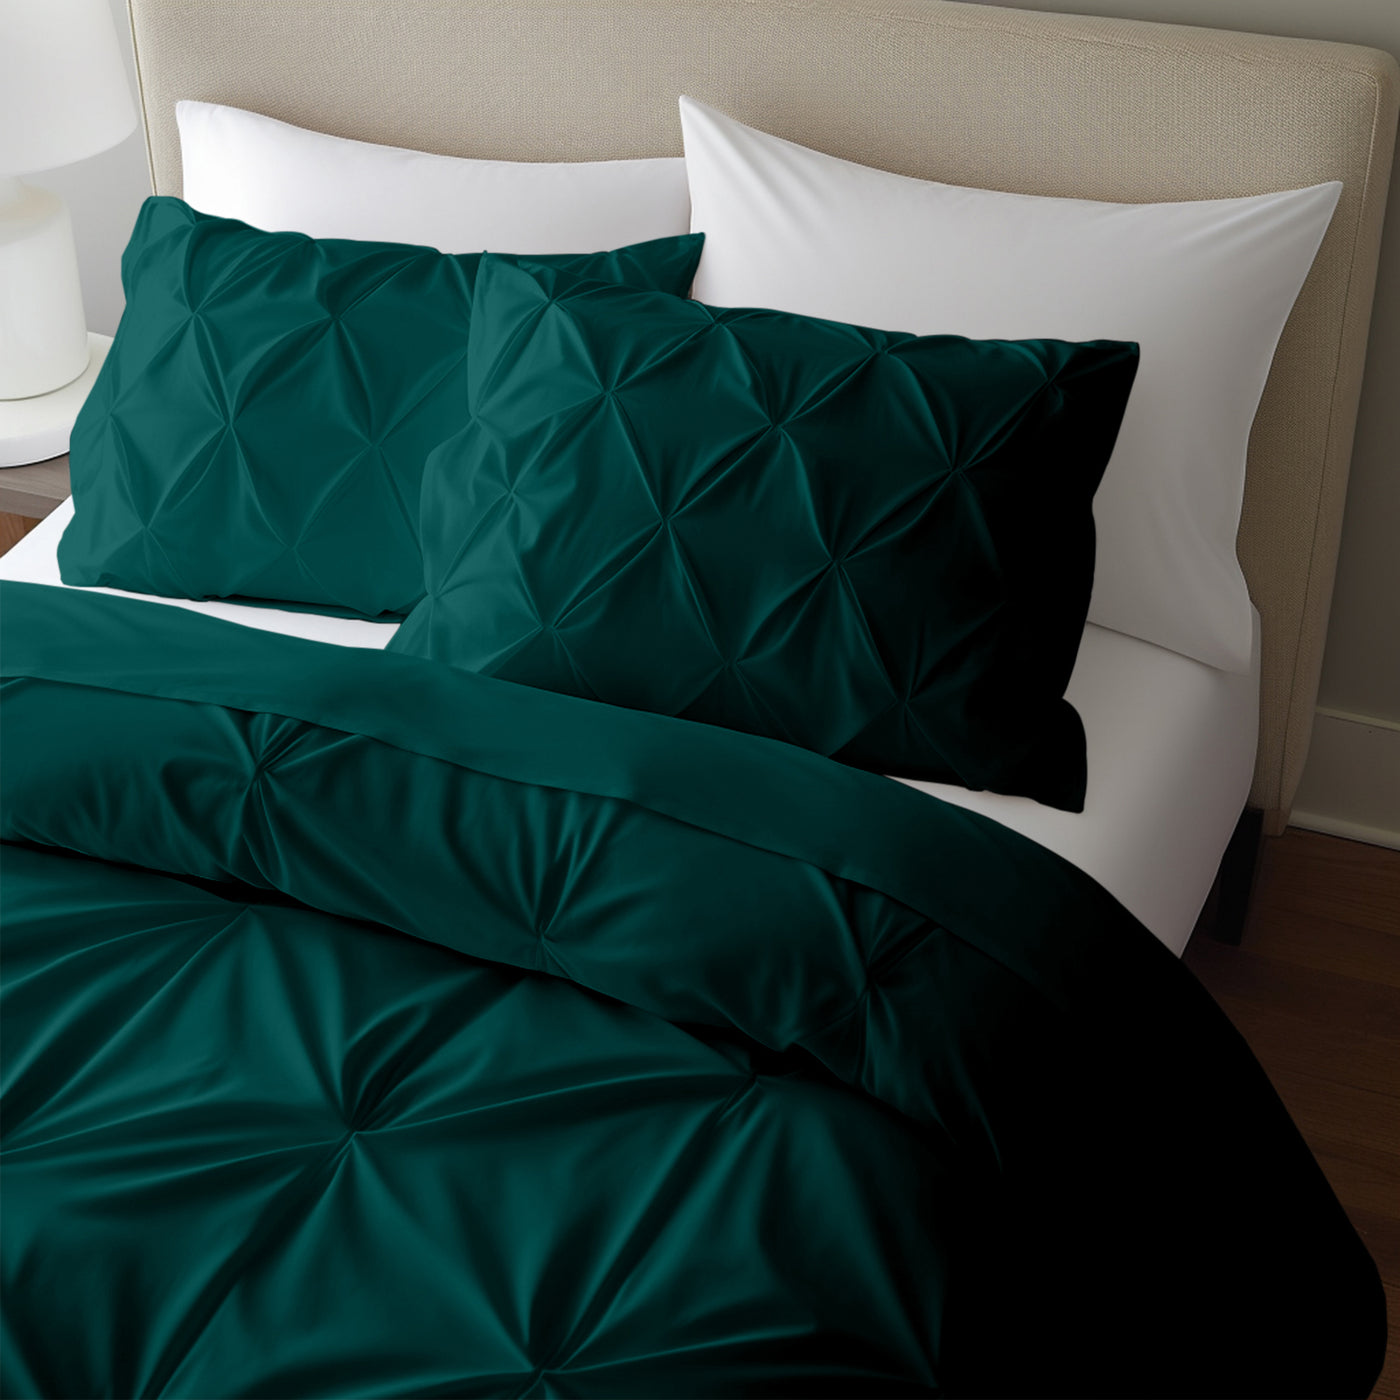 Pinch Pleated 300 TC Egyptian Cotton Duvet Cover Set - Teal